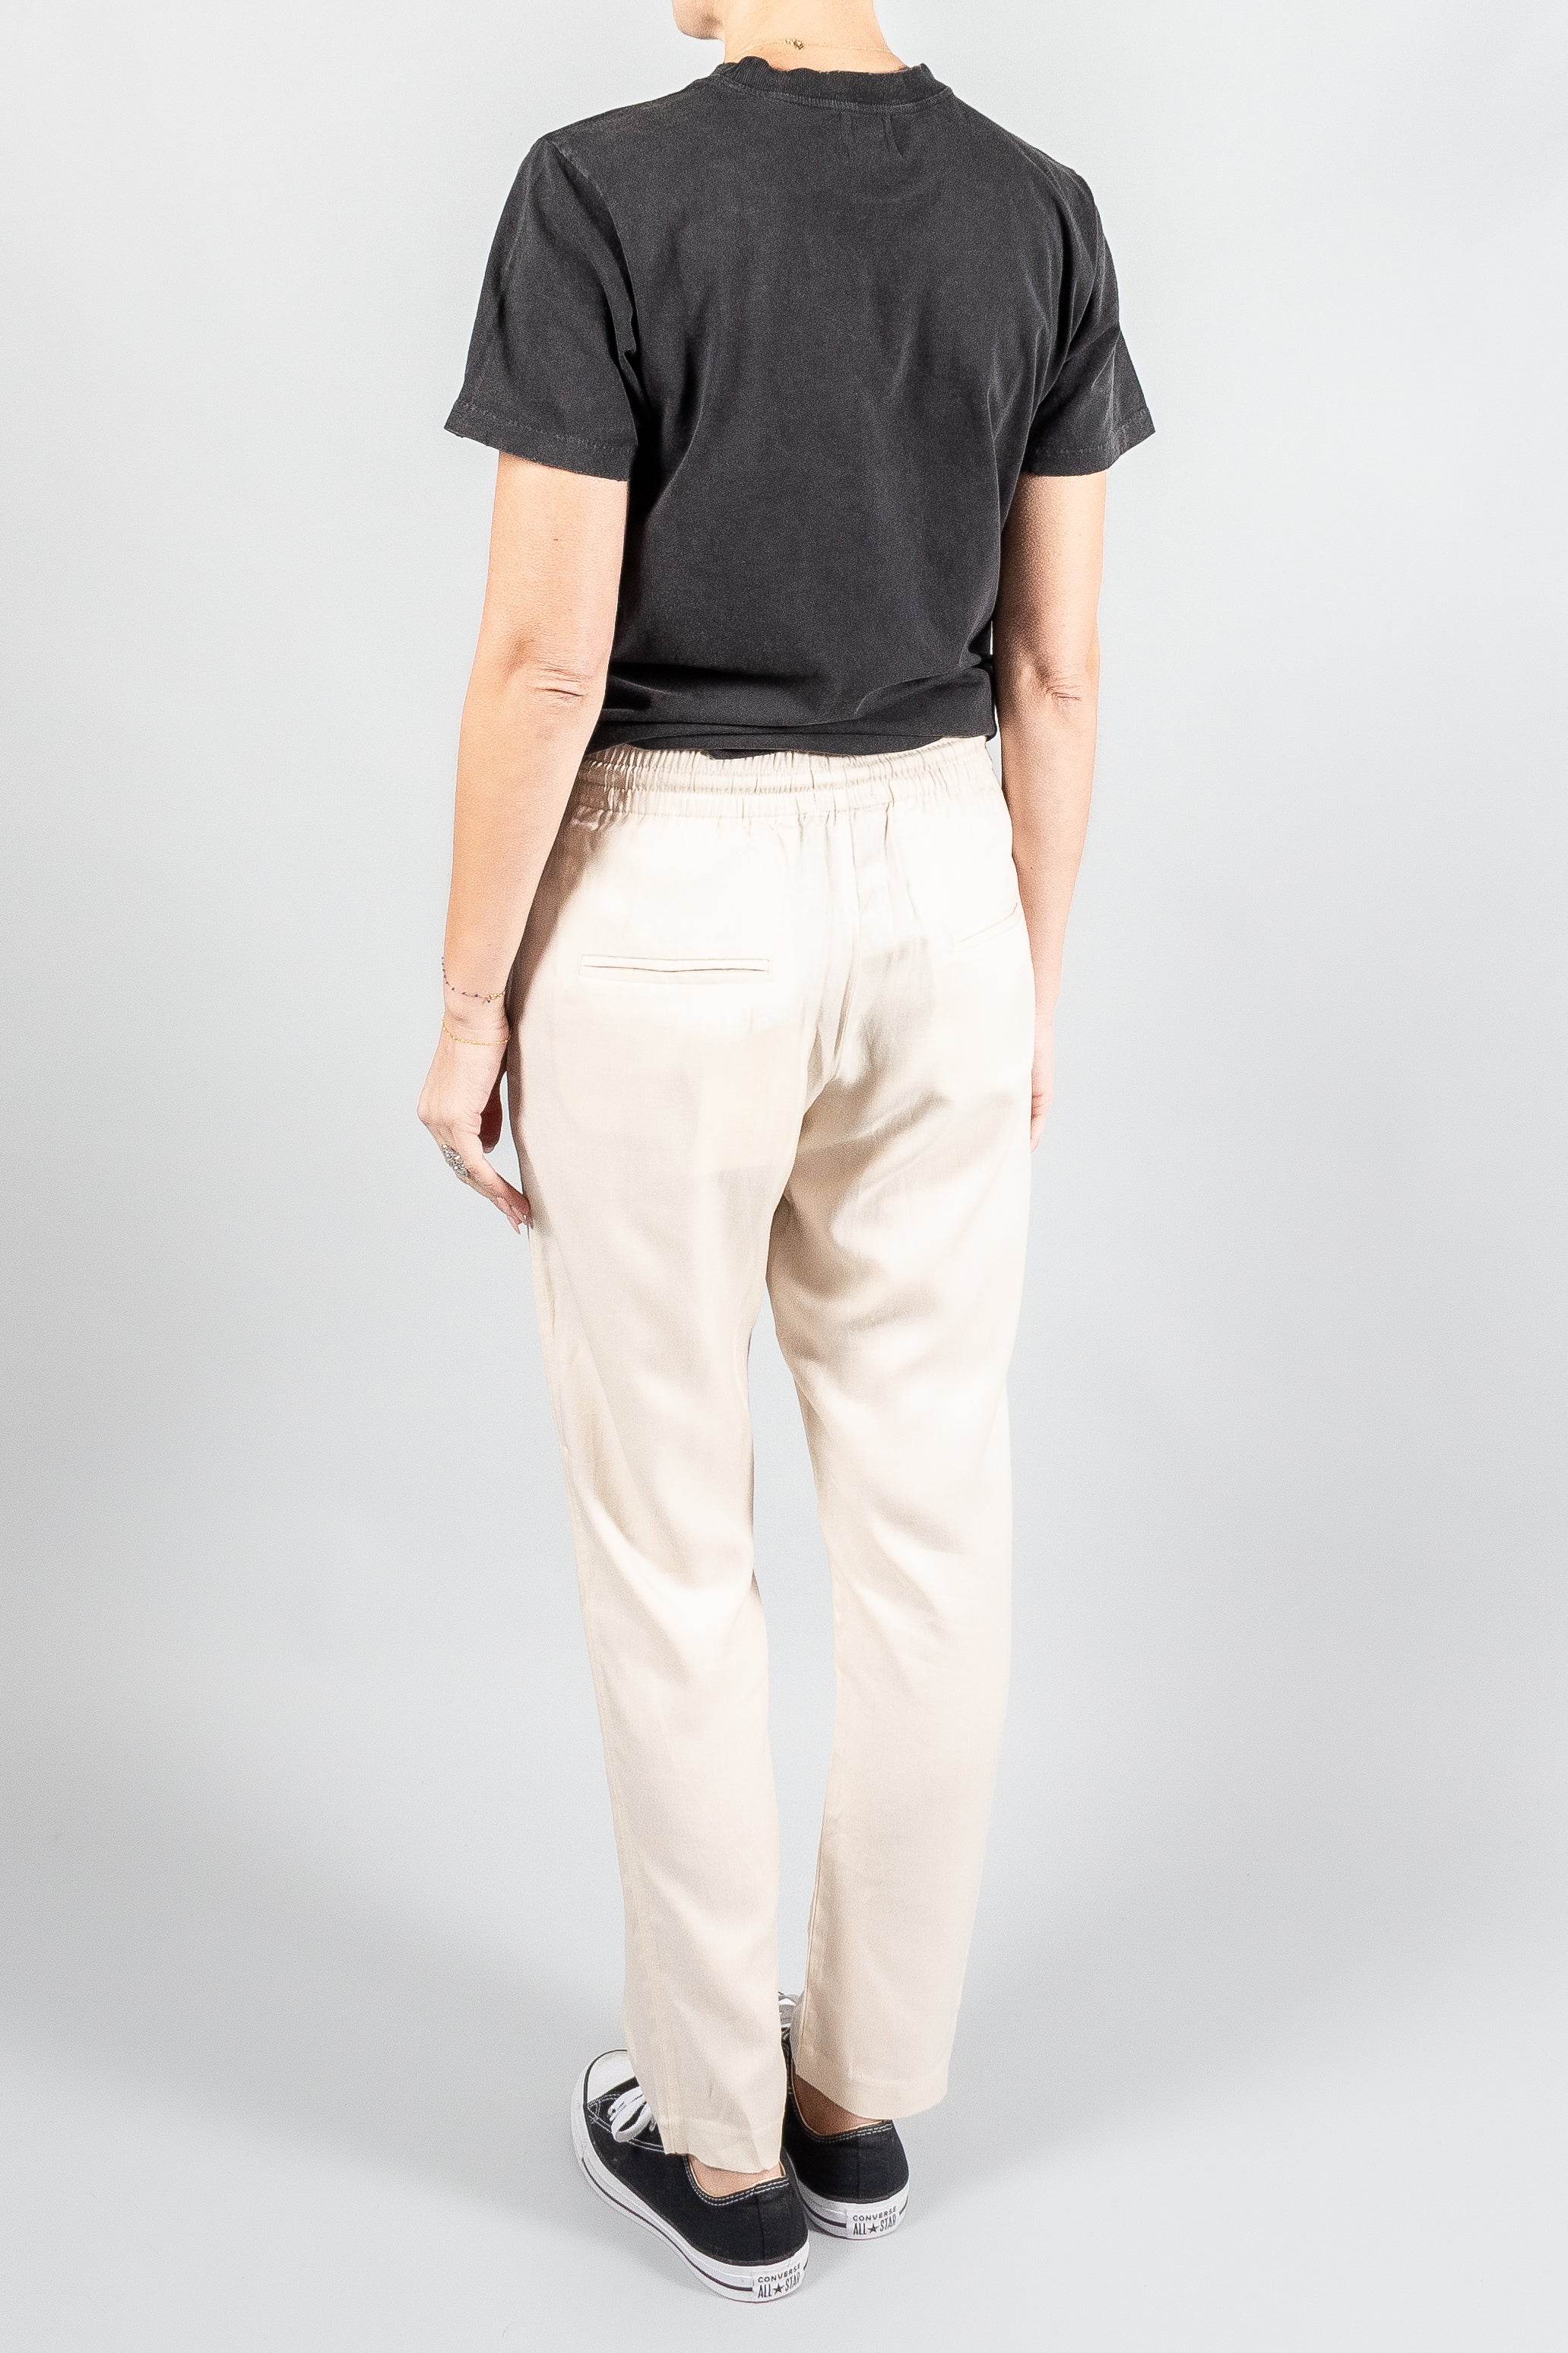 Isabel Marant Etoile Berati Pants-Pants and Shorts-Misch-Boutique-Vancouver-Canada-misch.ca